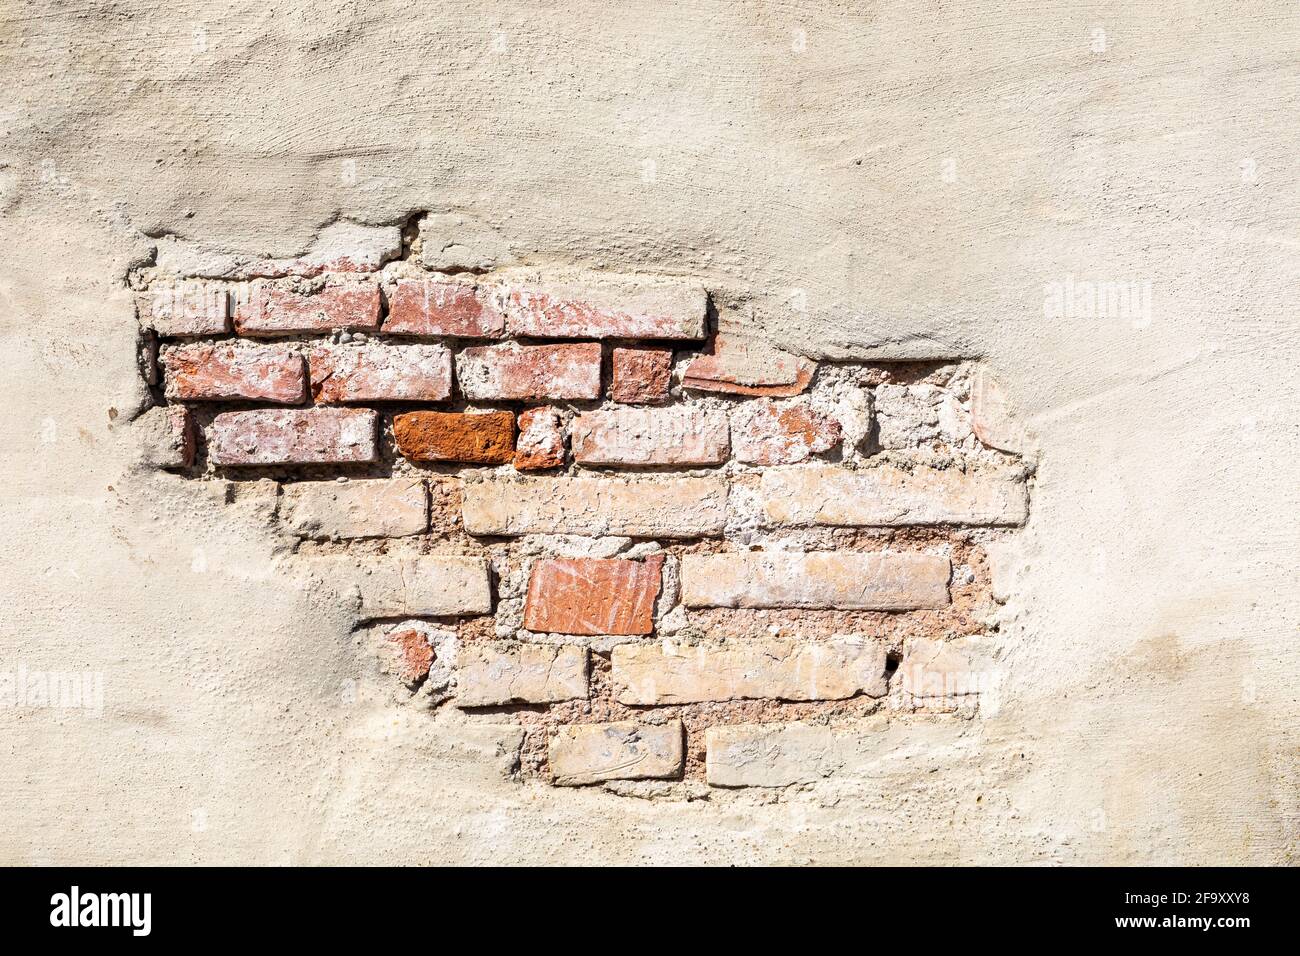 Old wall with crumbled plaster Stock Photo